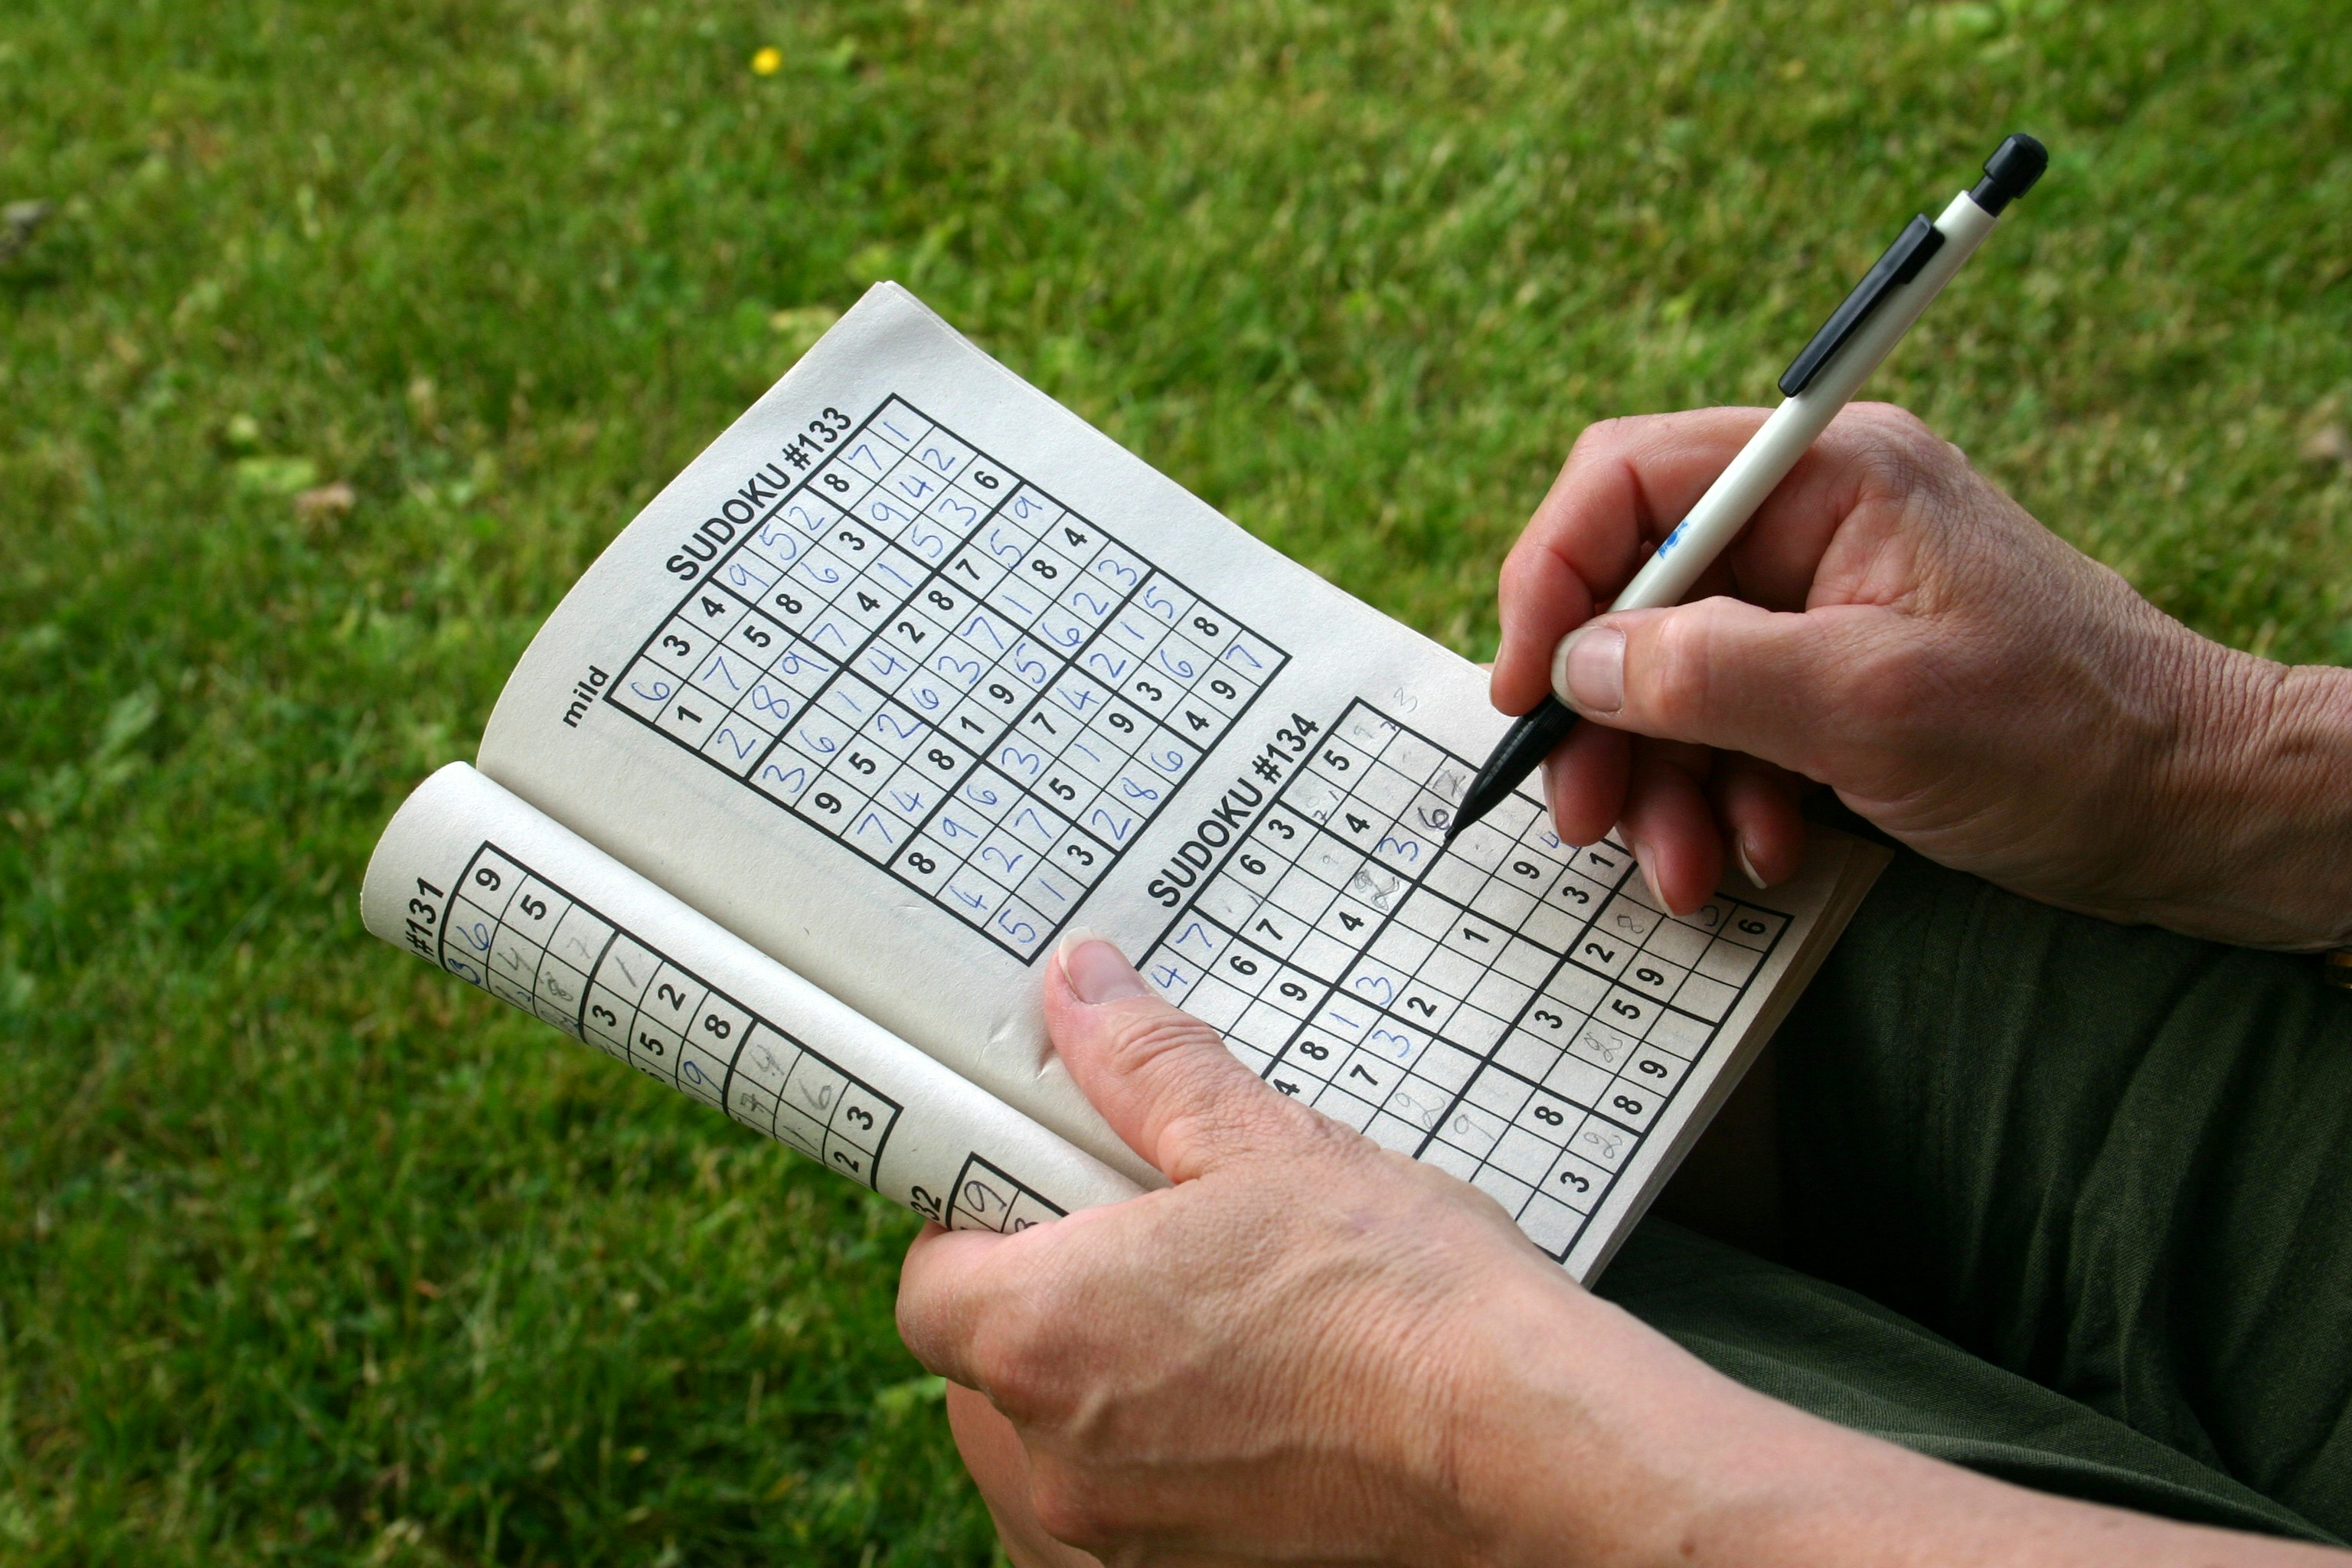 sudoku-rules-for-beginners-how-to-play-and-tips-leisure-yours